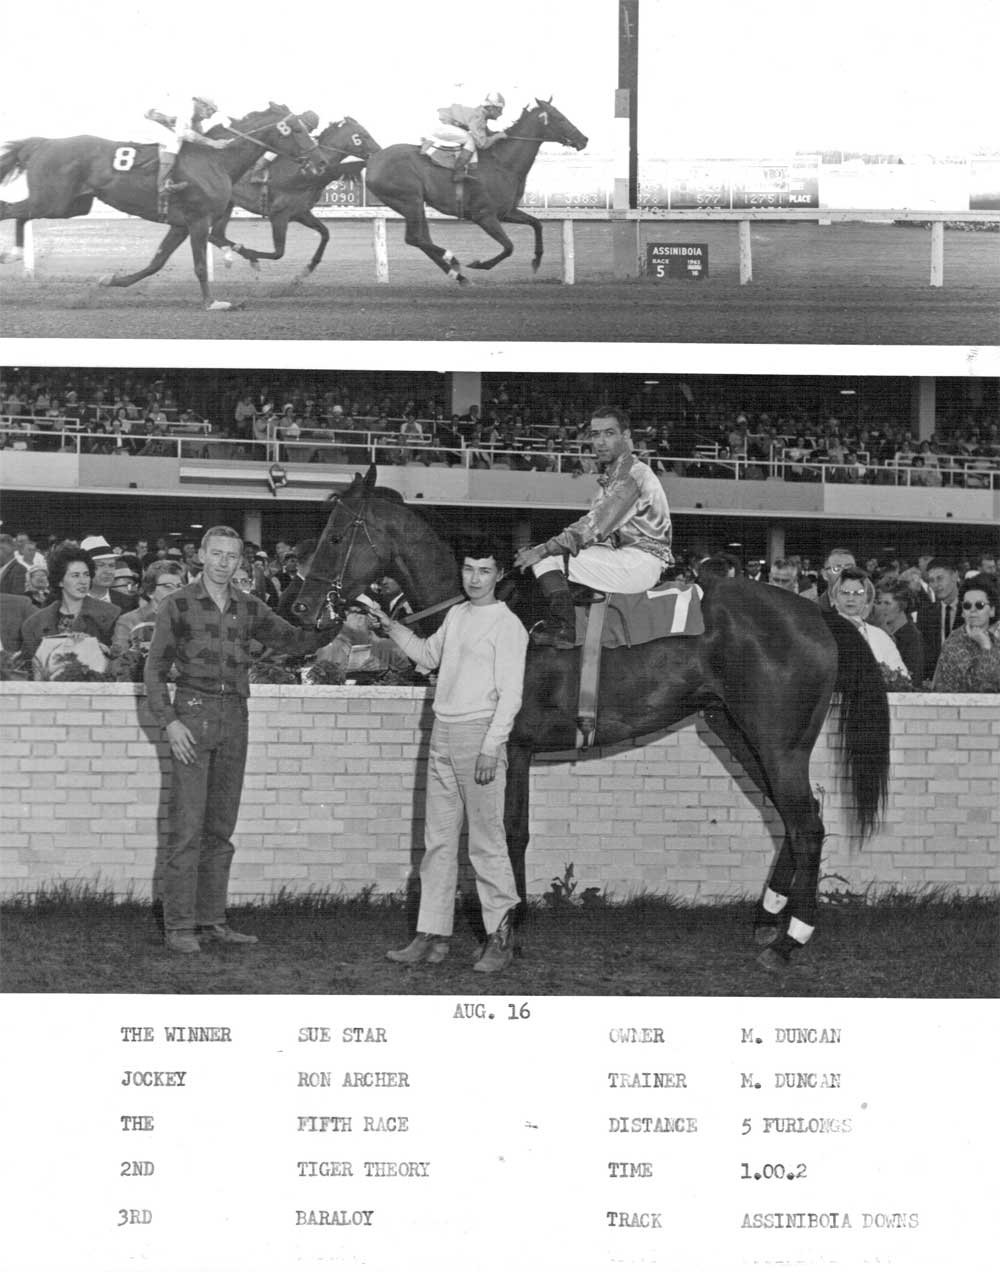 Sue Star wins the 5th race at ASD on August 16, 1962 for a owner-trainer Murray Duncan.